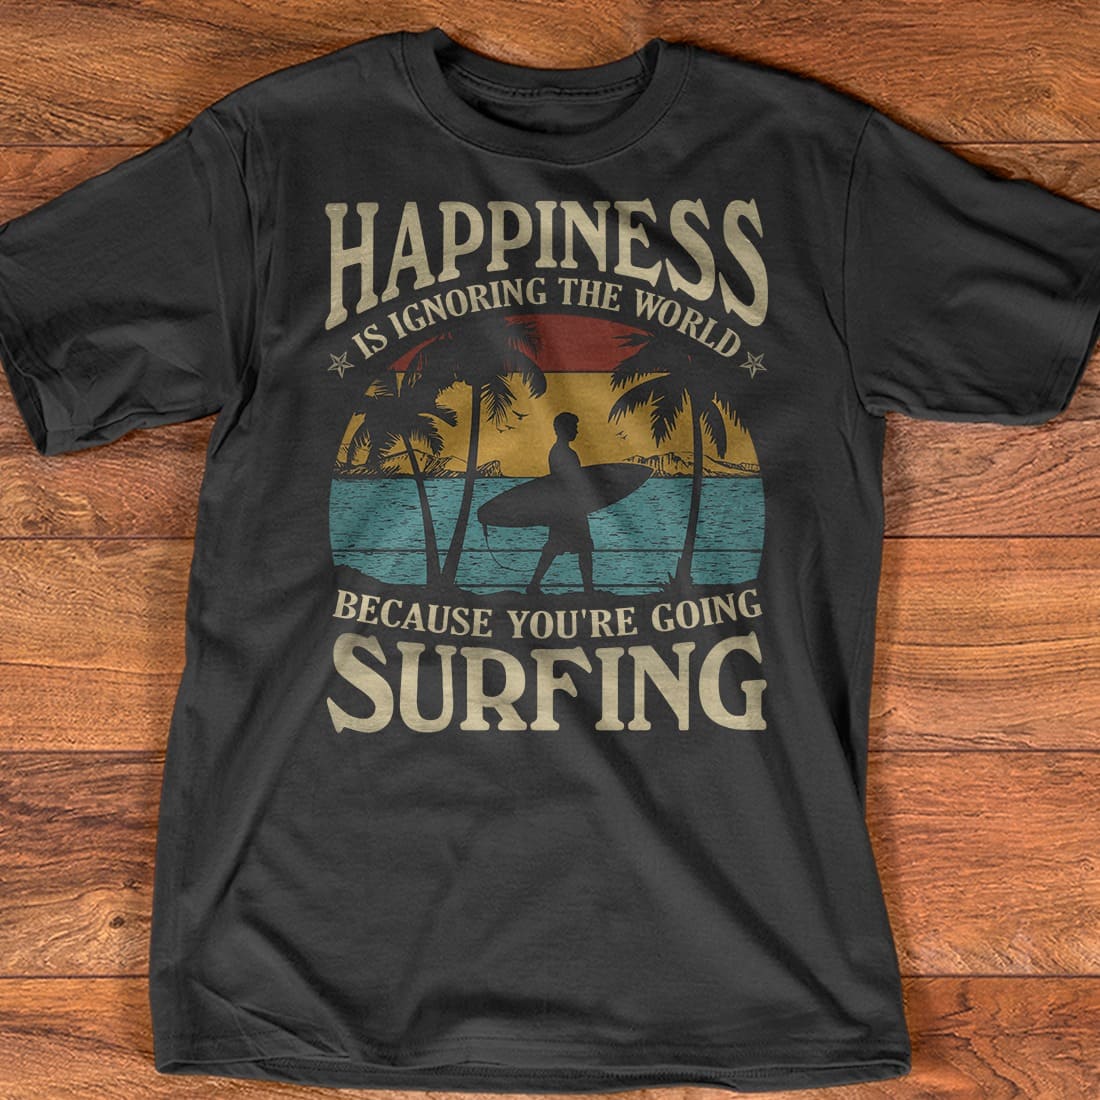 Happiness is ignoring the world because you're going surfing - Gift for wave surfing